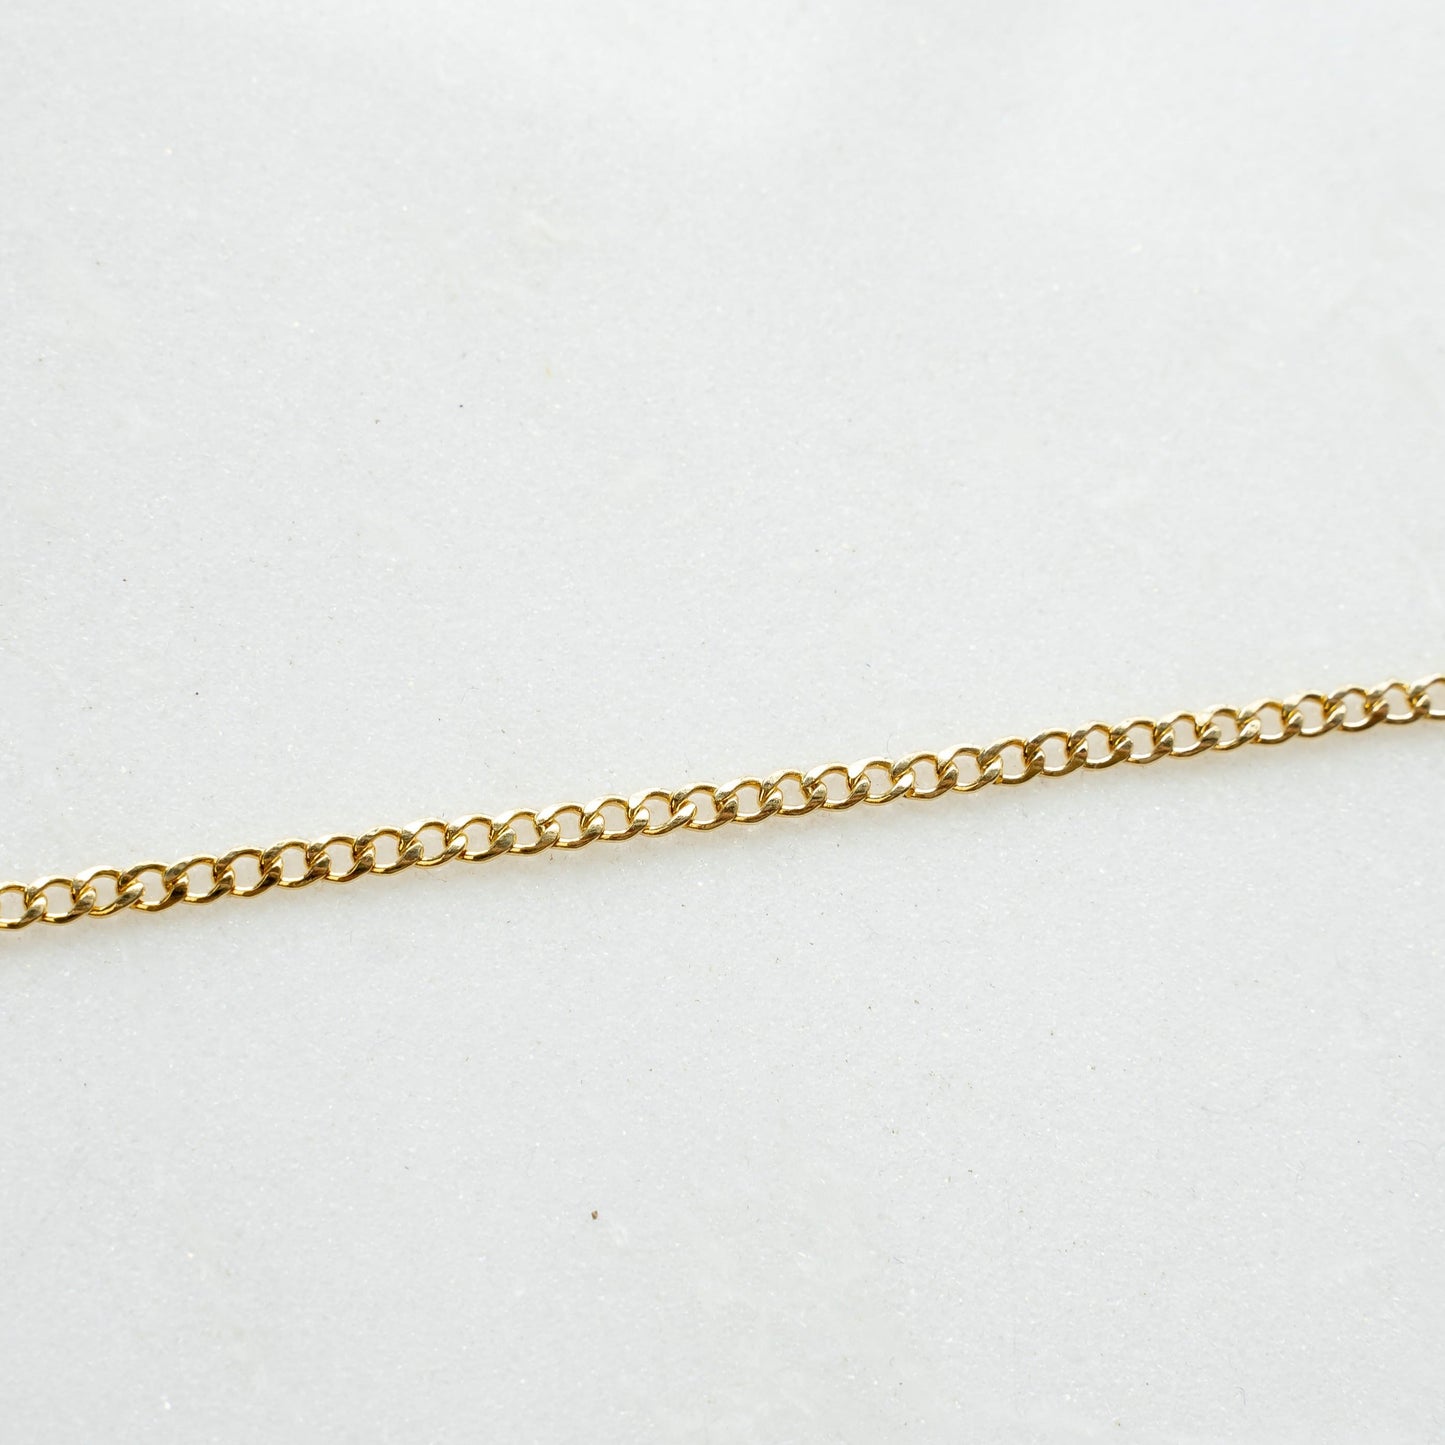 Lovely Links Permanent Jewelry JEWELRY The Sis Kiss Gold Filled 3.3 mm Curb Link Cable Chain 15 Minutes